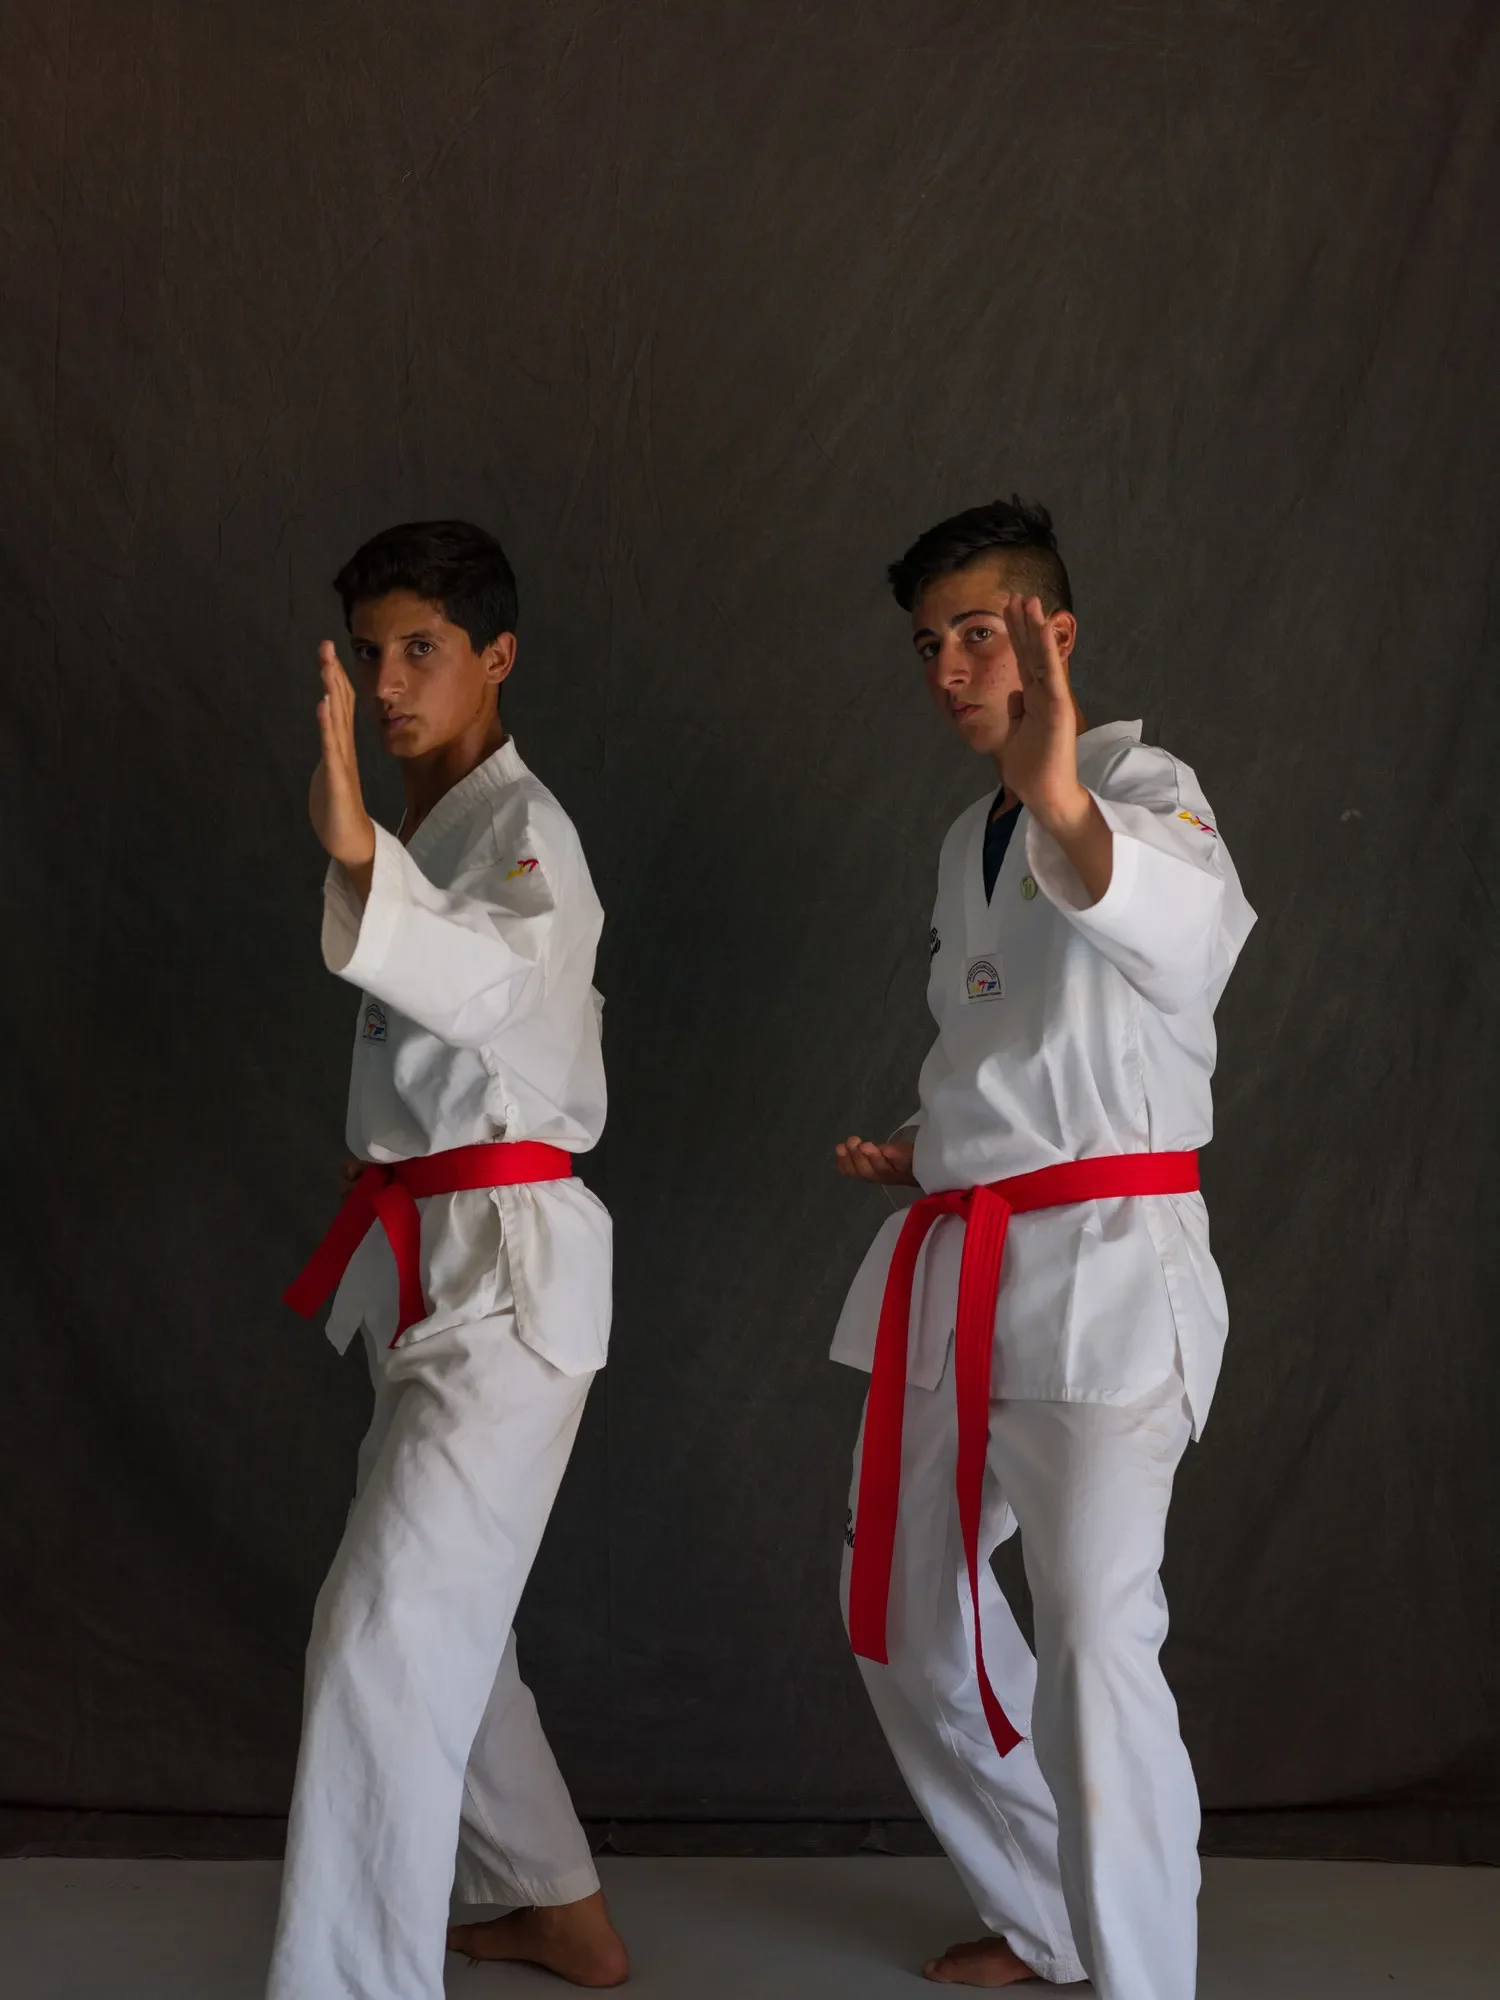 Influenced by their love of taekwondo and Bruce Lee films, Wael, left, and Abdulkareem created an action movie called 